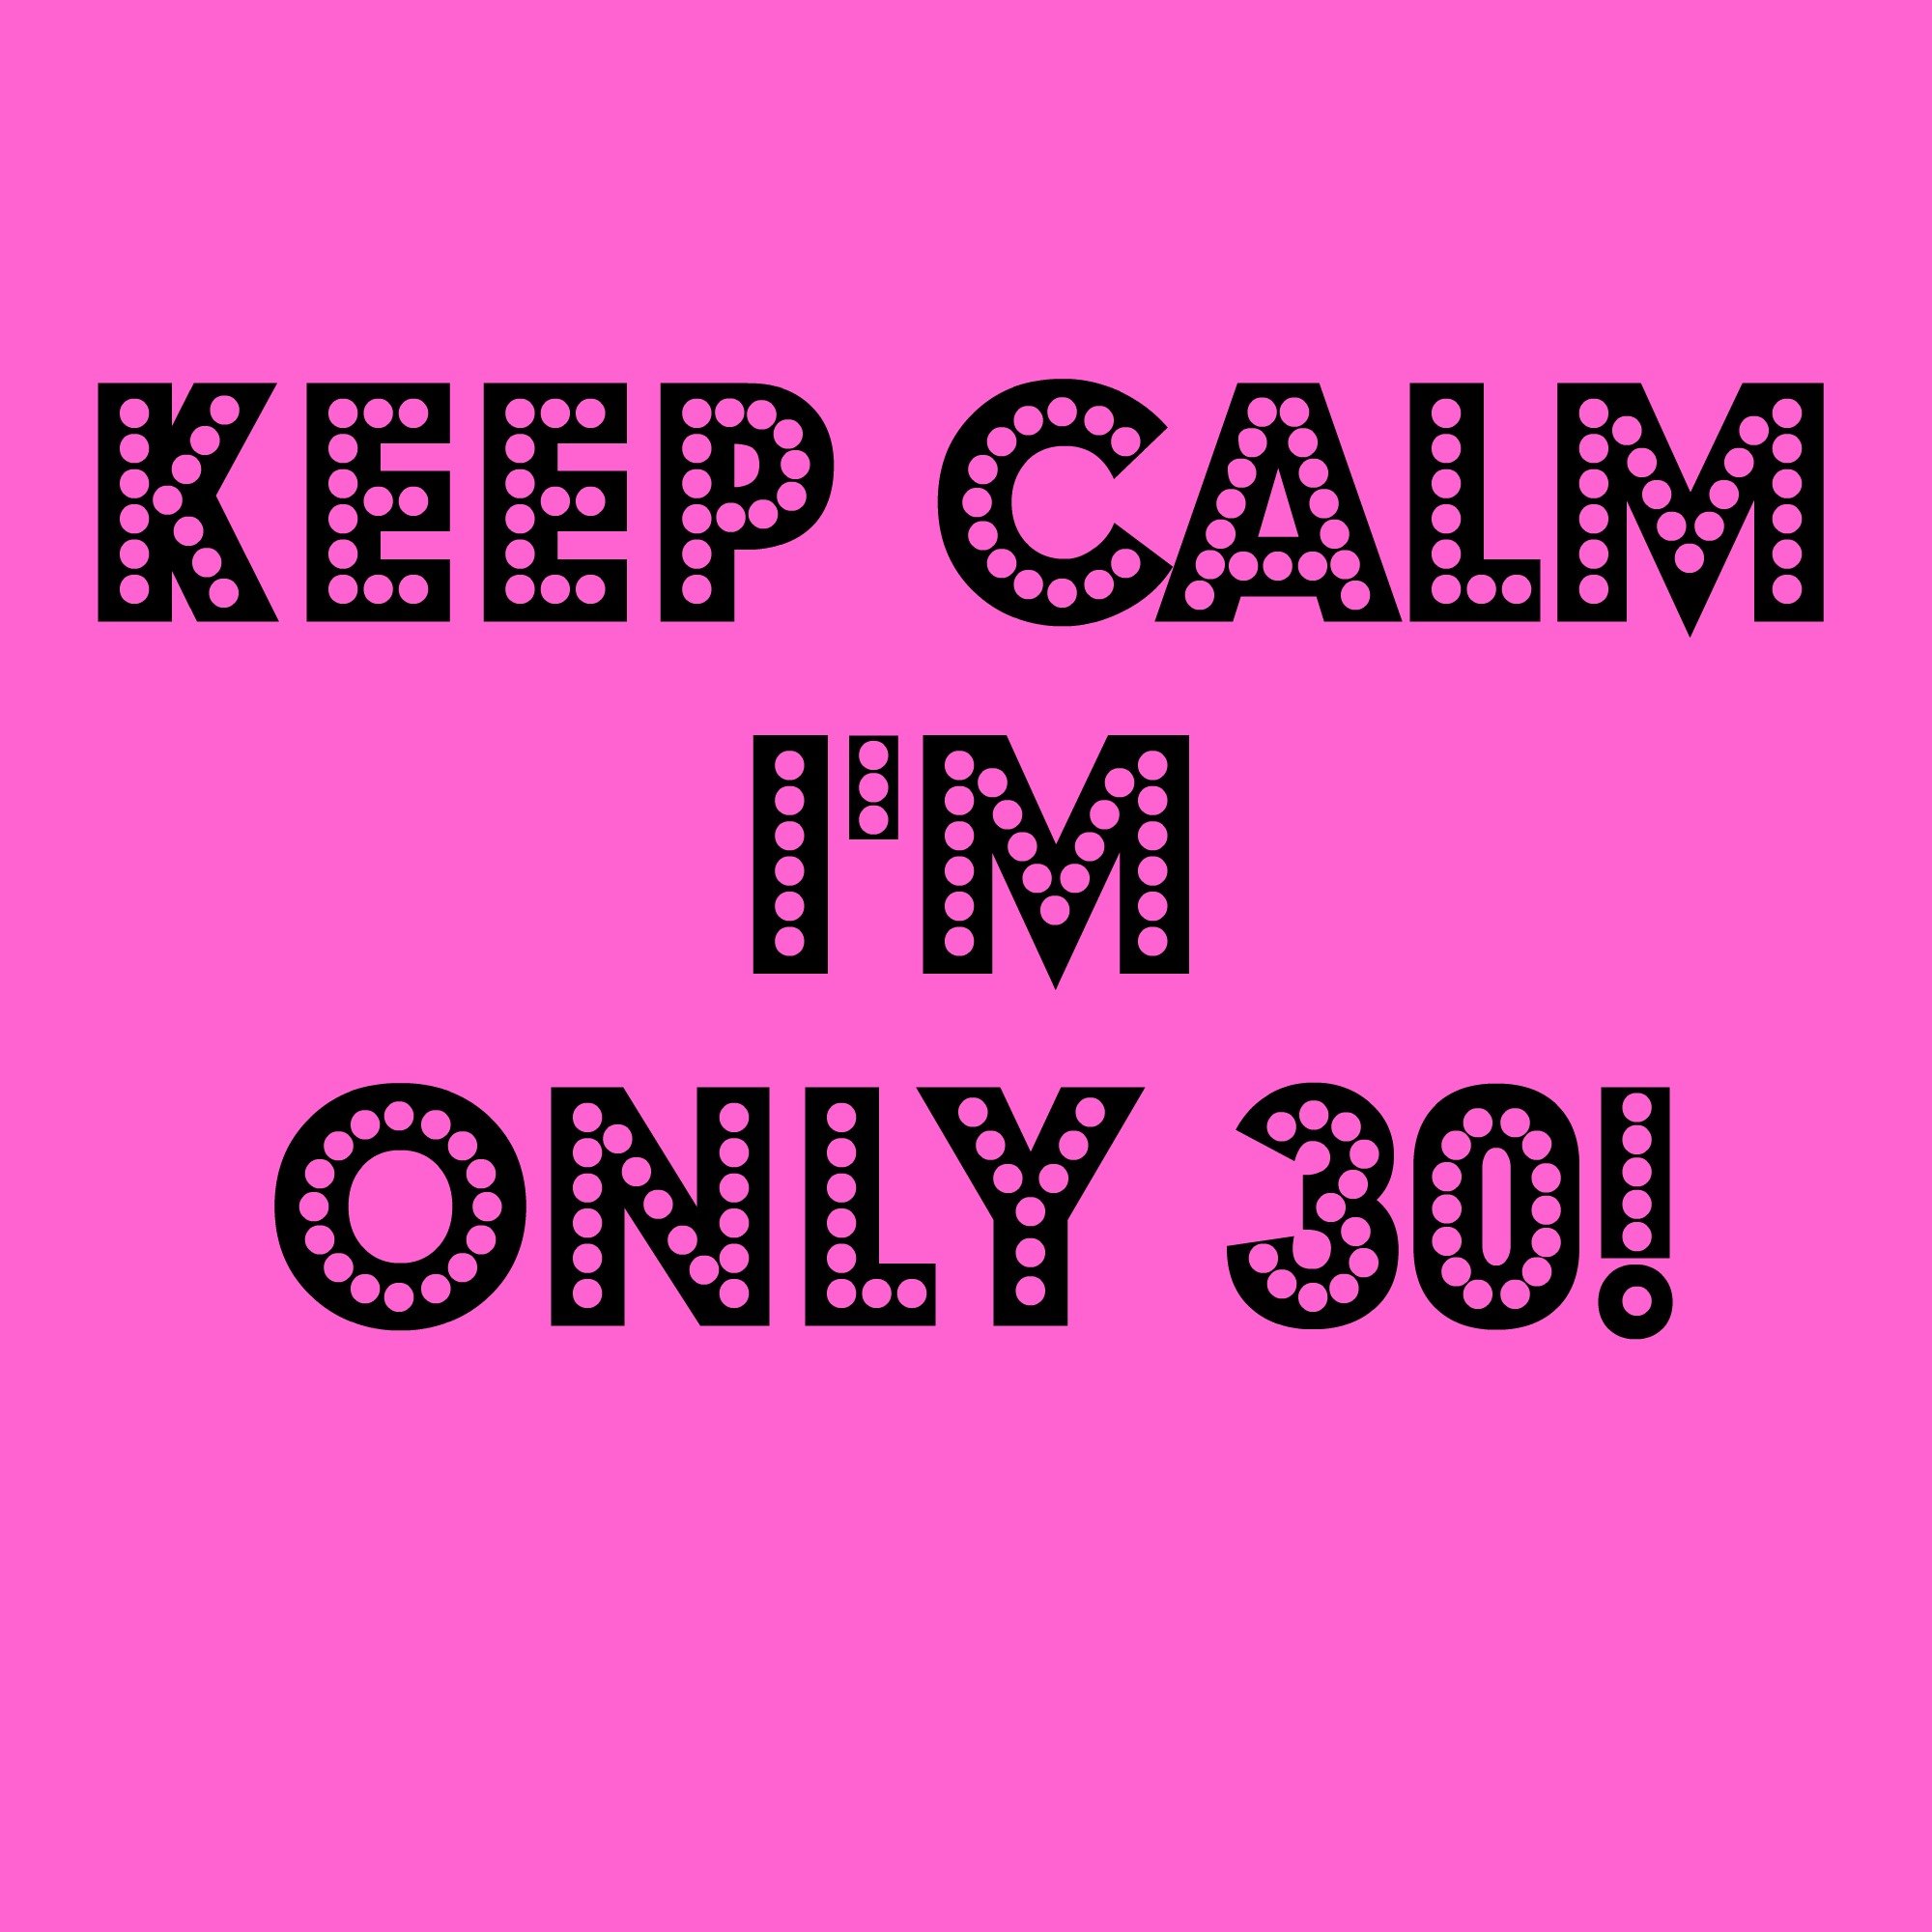 I m only your. Keep Calm 30. Ceep Calm i am 30. Various artists 2010 keep Calm and Love me. Only30.